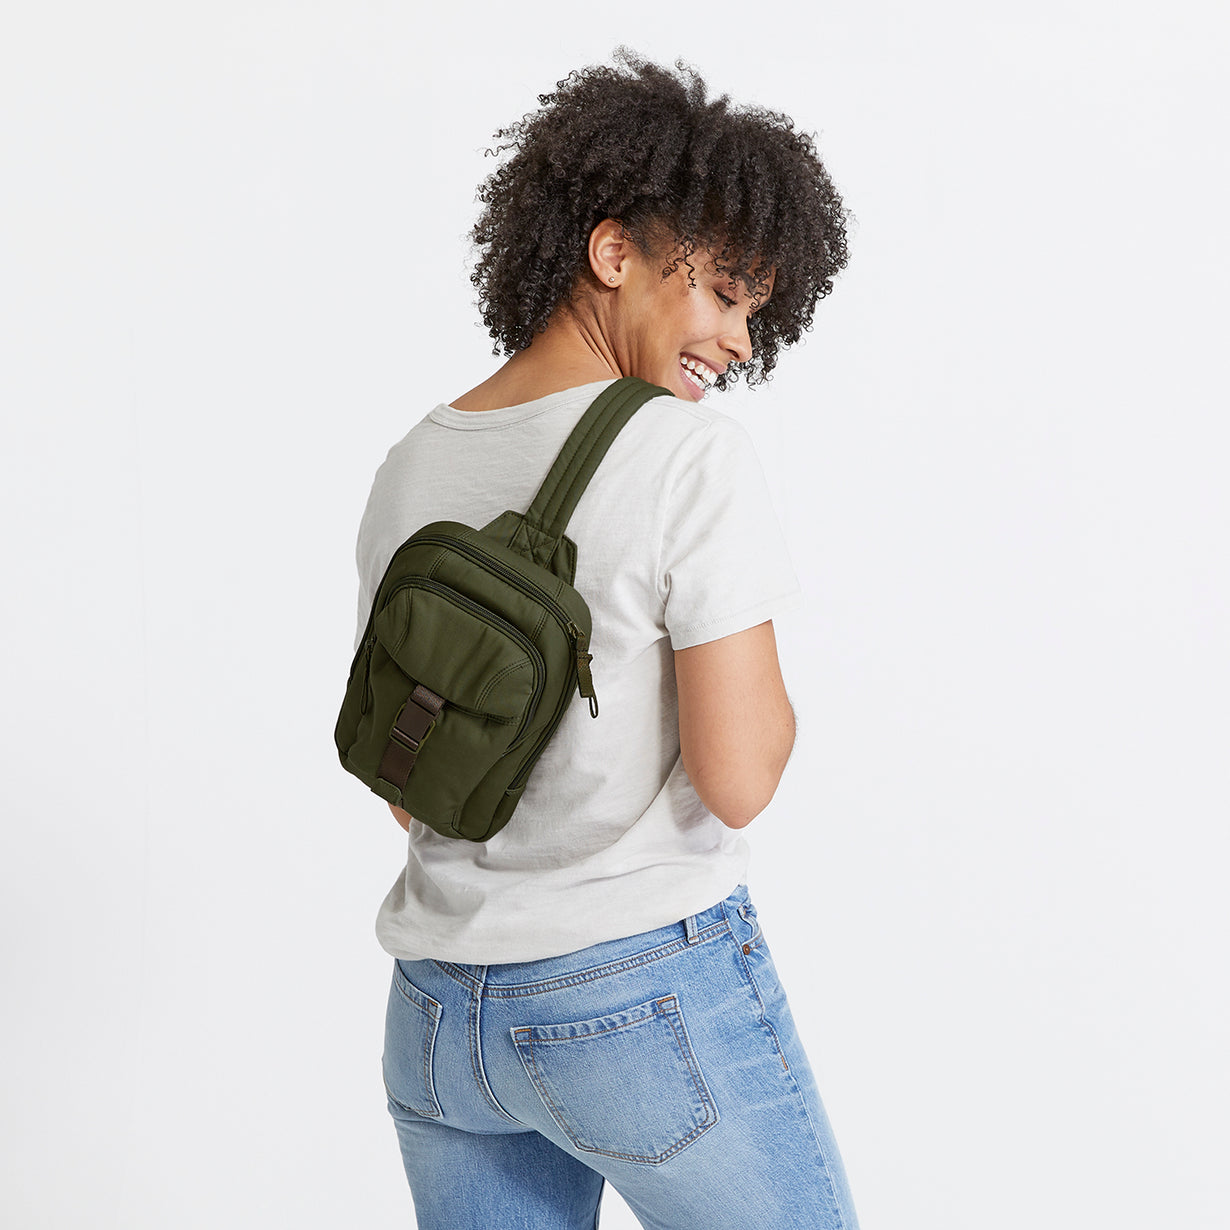 Shoulder Backpack Services - Learn how to Do It Right